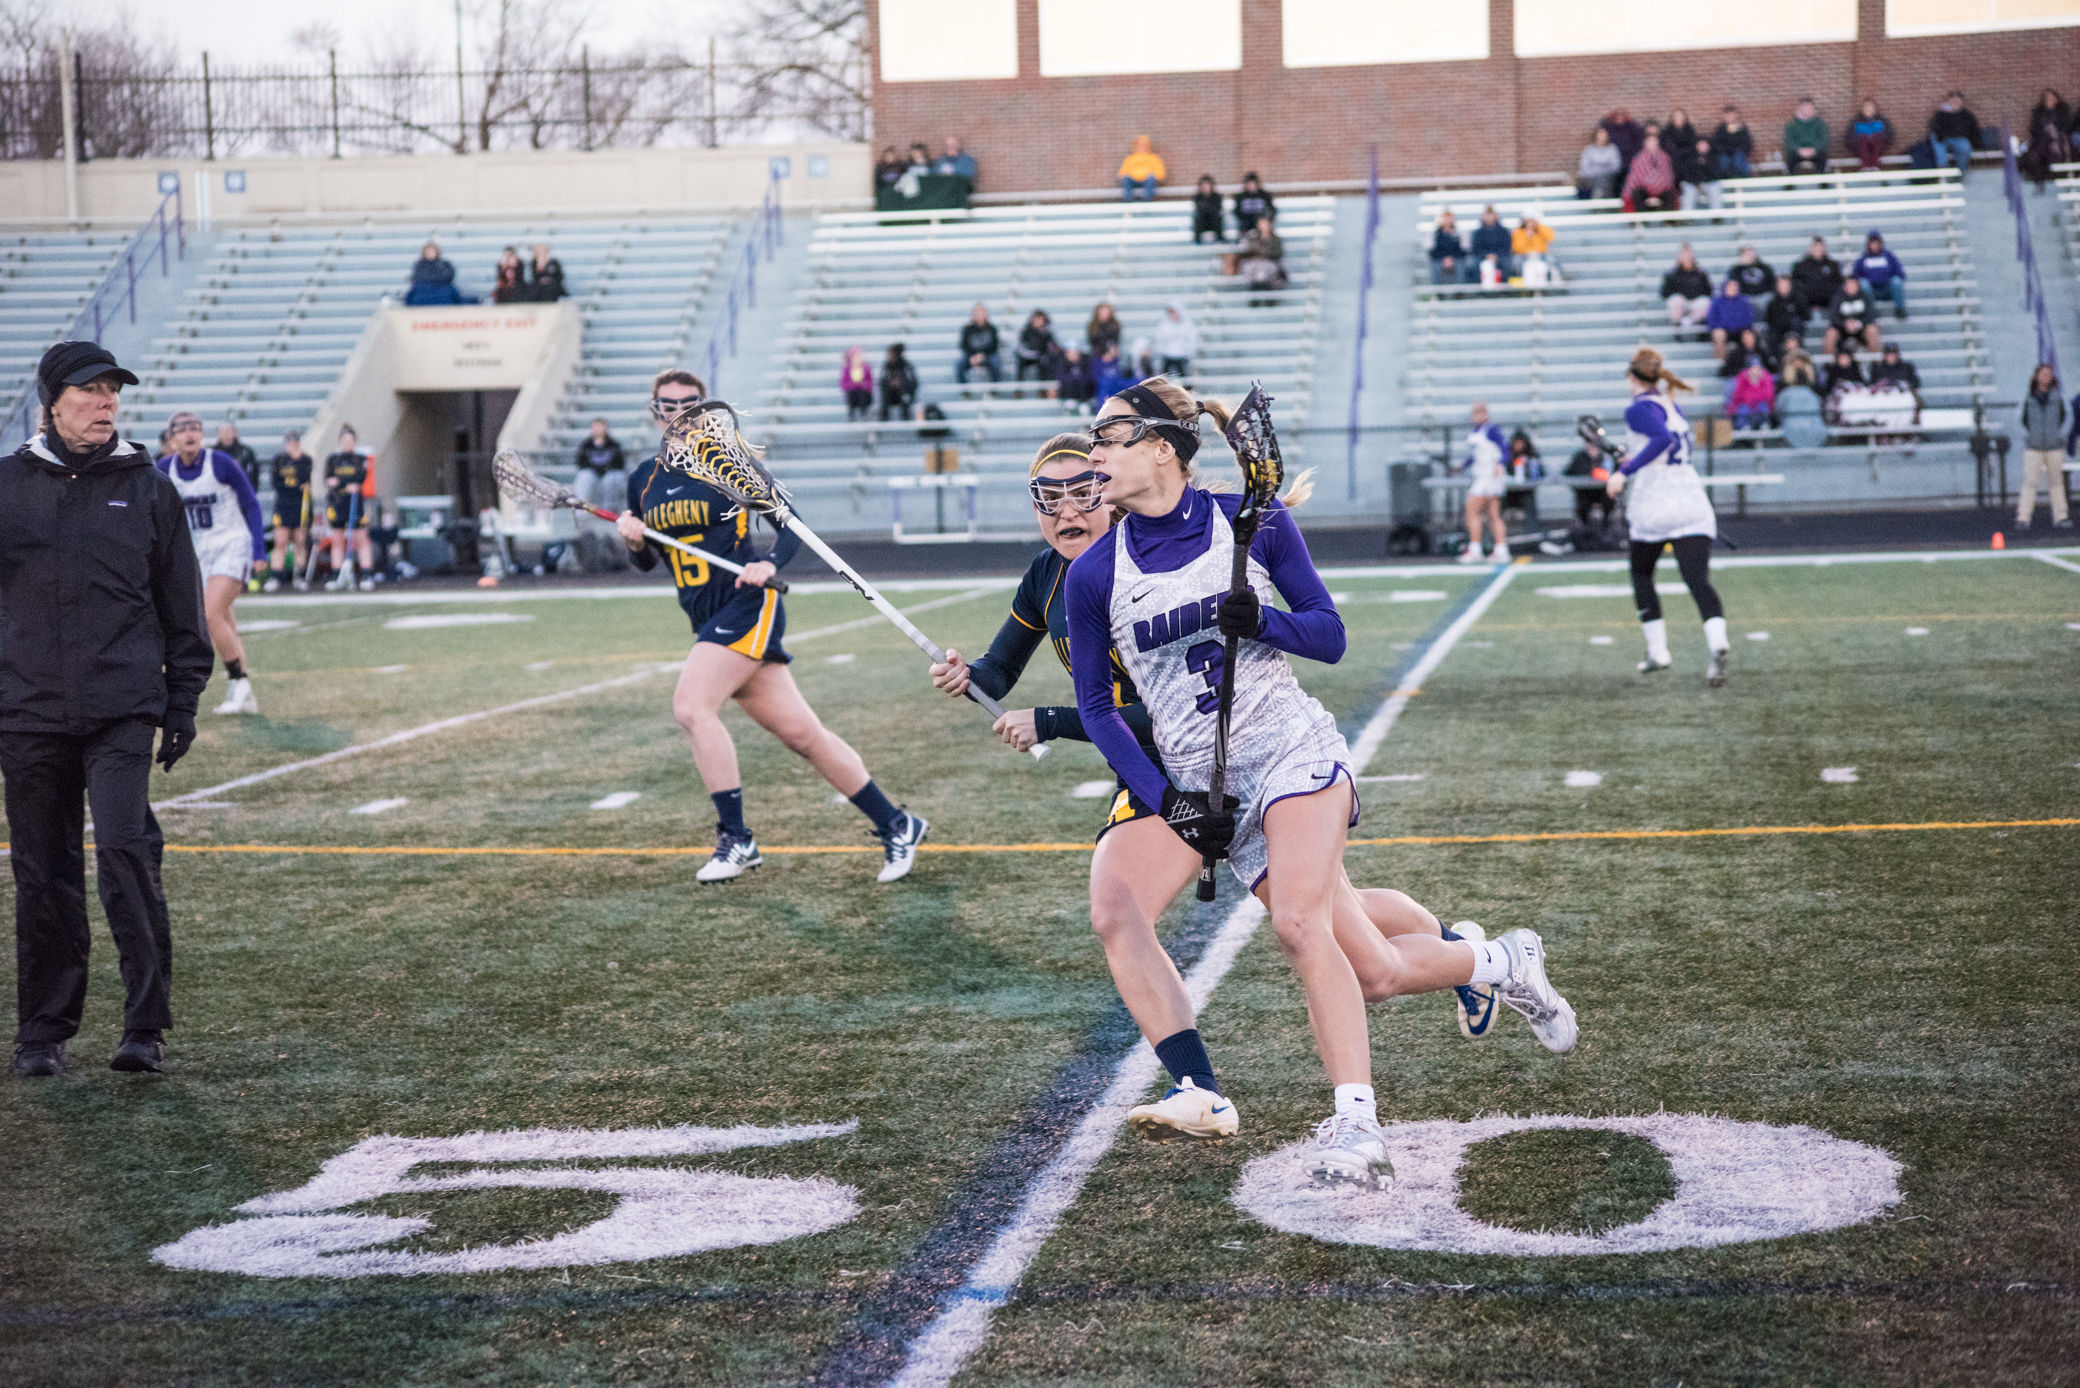 Mount Union women's lacrosse anxious for national success